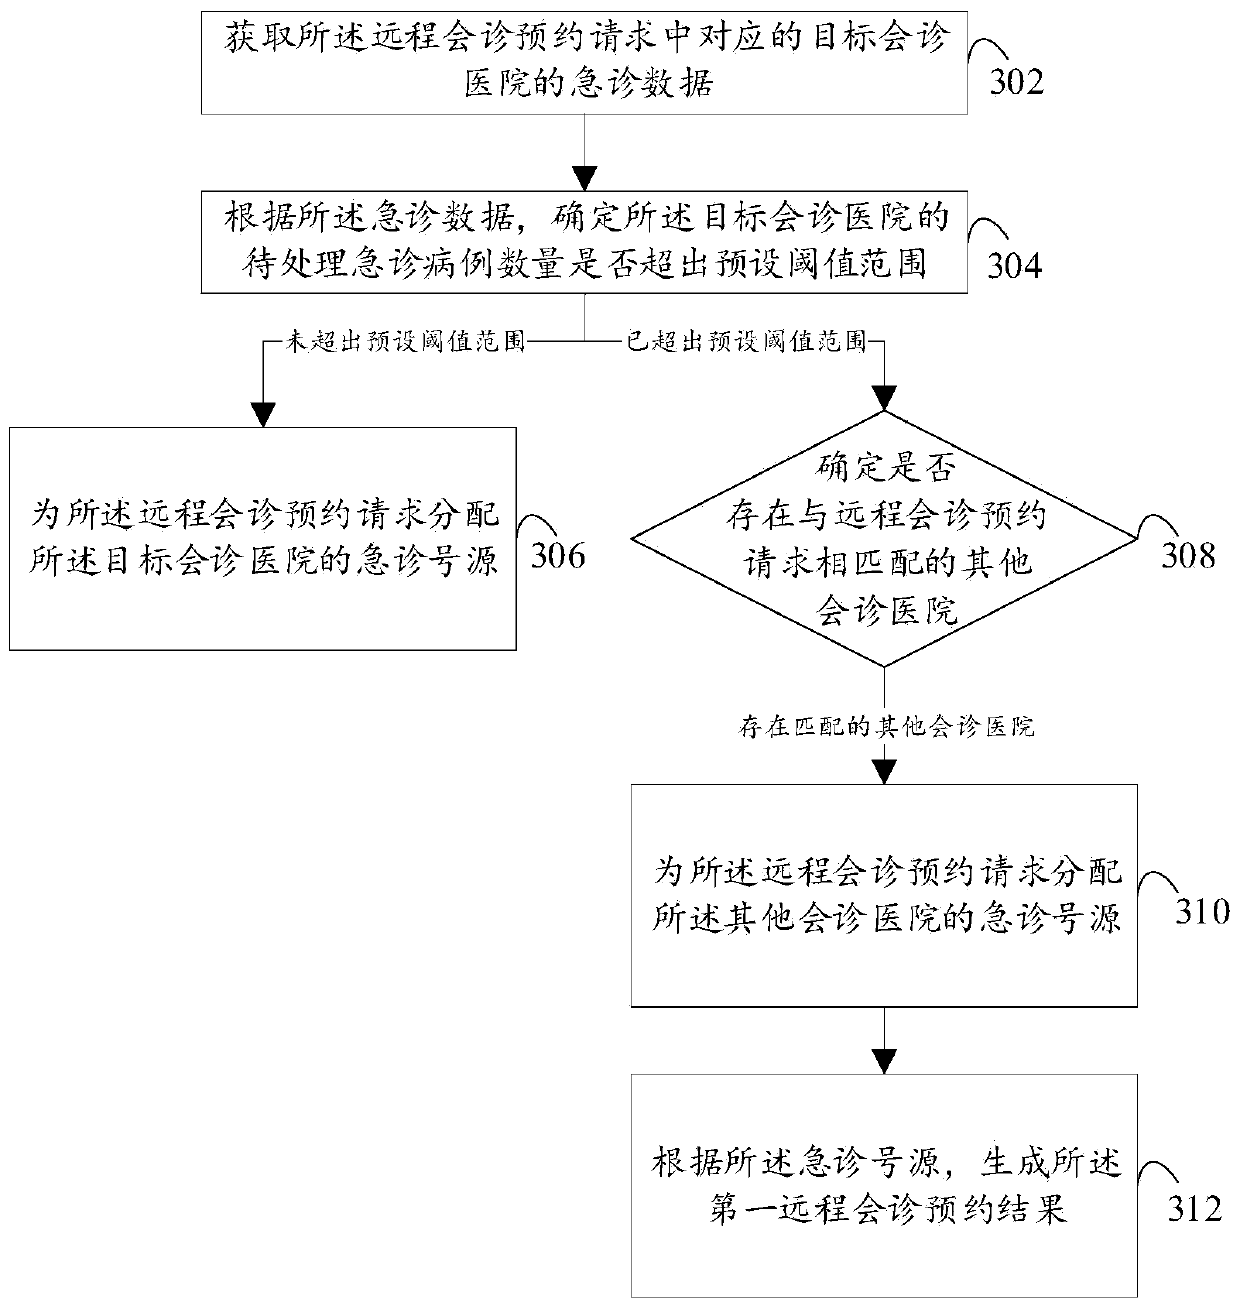 Remote consultation method and related equipment